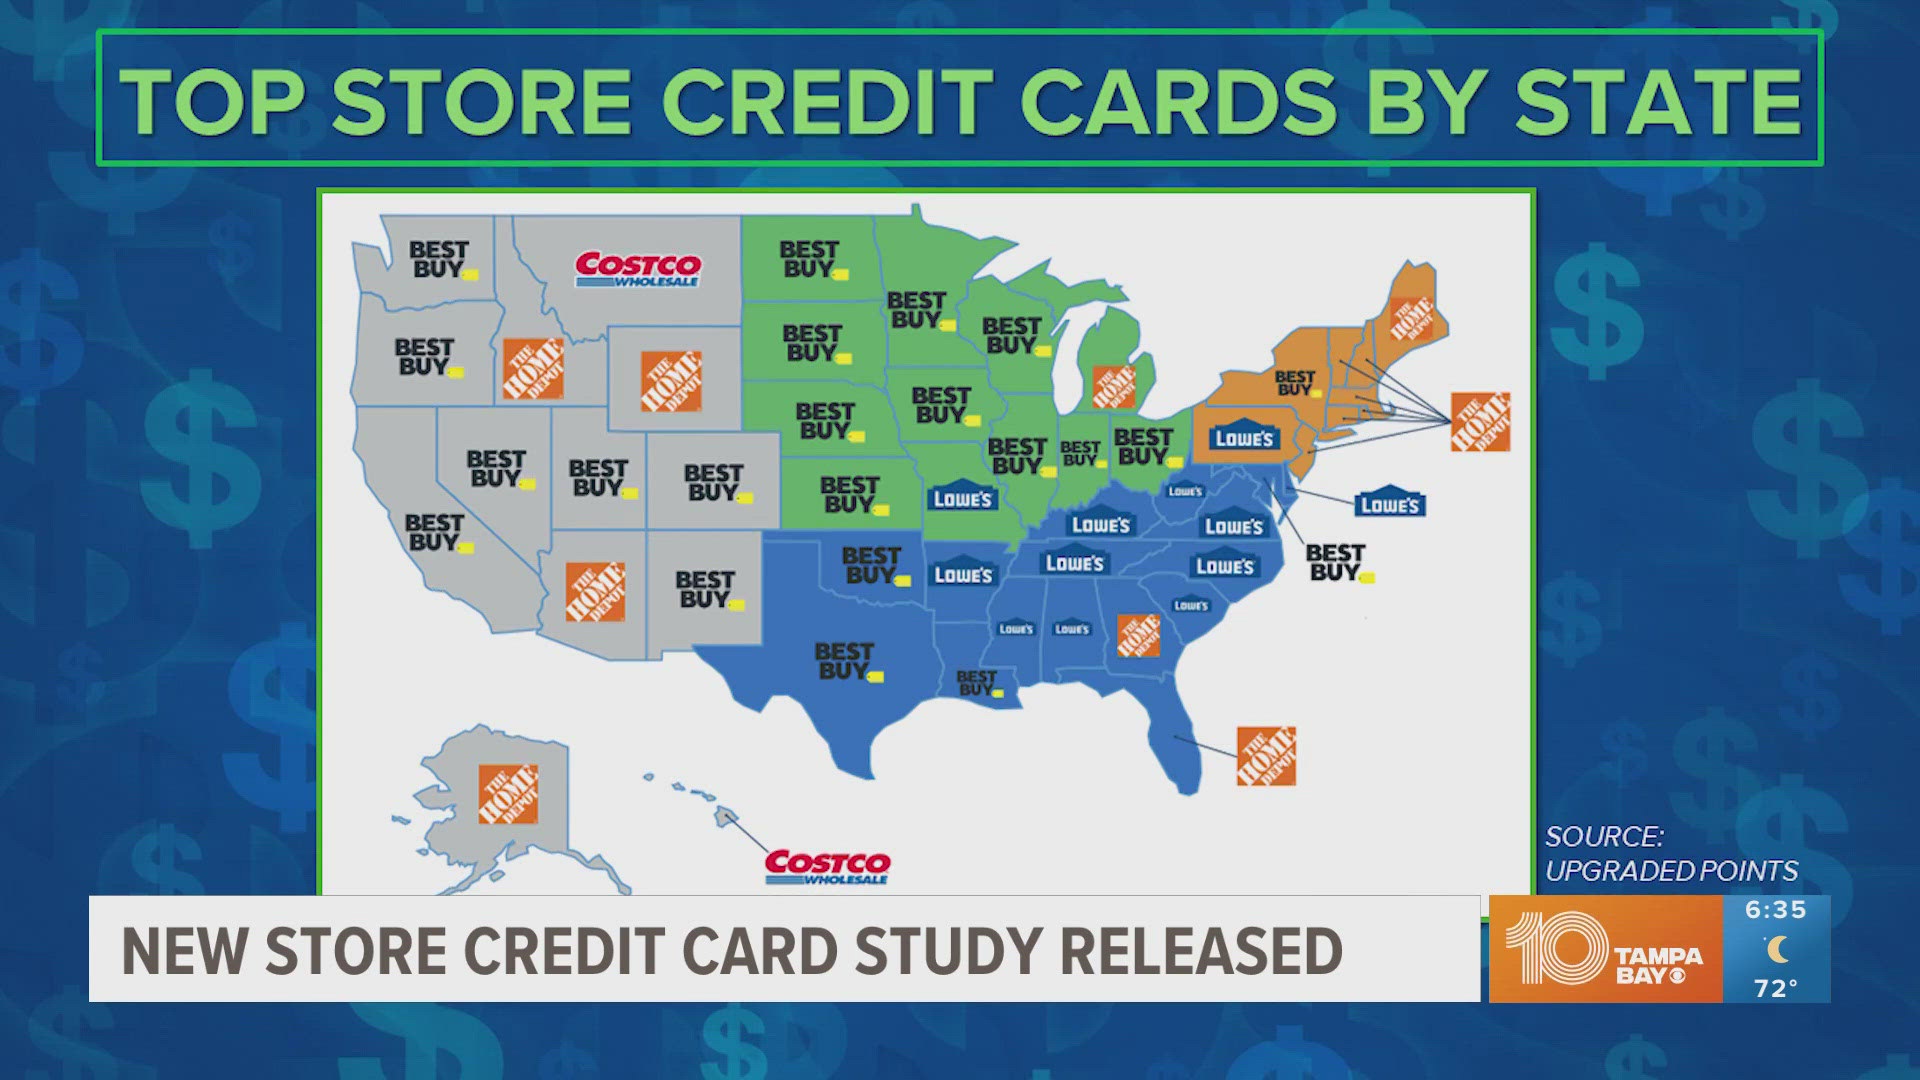 Best Buy, Home Depot and Lowe's rounded out the top store credit cards nationally.